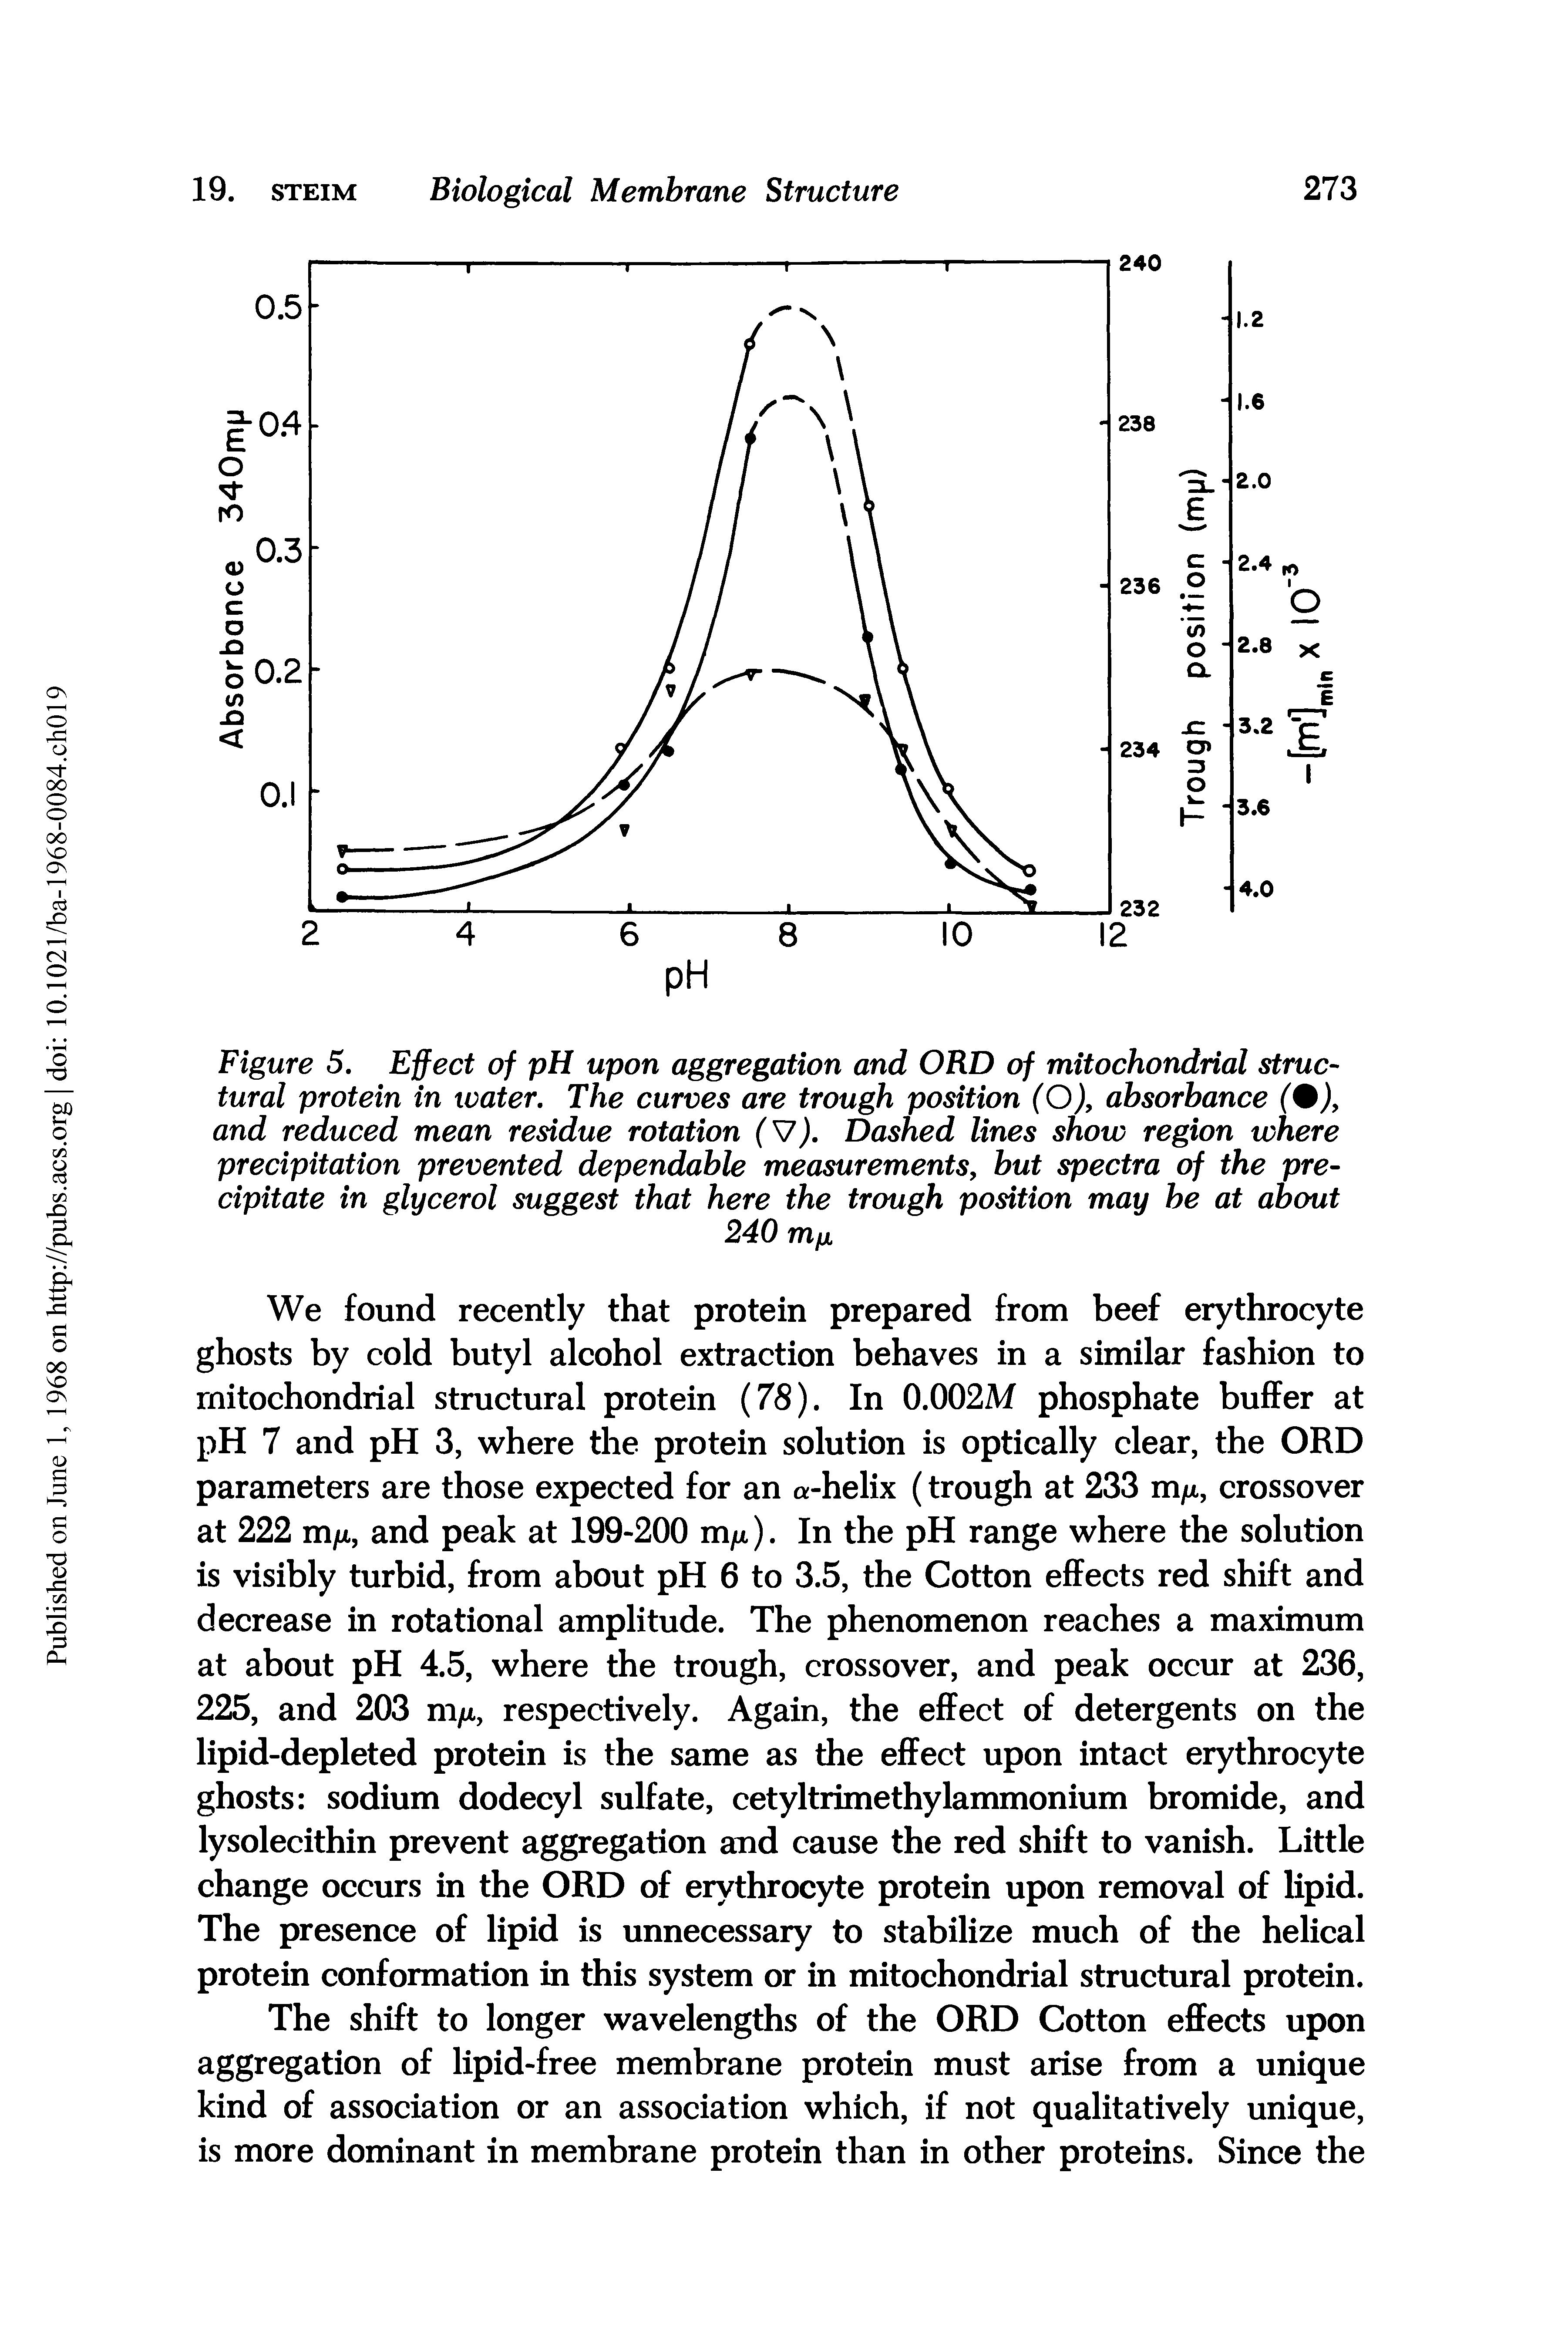 Figure 5. Effect of pH upon aggregation and ORD of mitochondrial structural protein in xoater. The curves are trough position (O), absorbance (%), and reduced mean residue rotation (V). Dashed lines show region where precipitation prevented dependable measurements, but spectra of the precipitate in glycerol suggest that here the trough position may be at about...